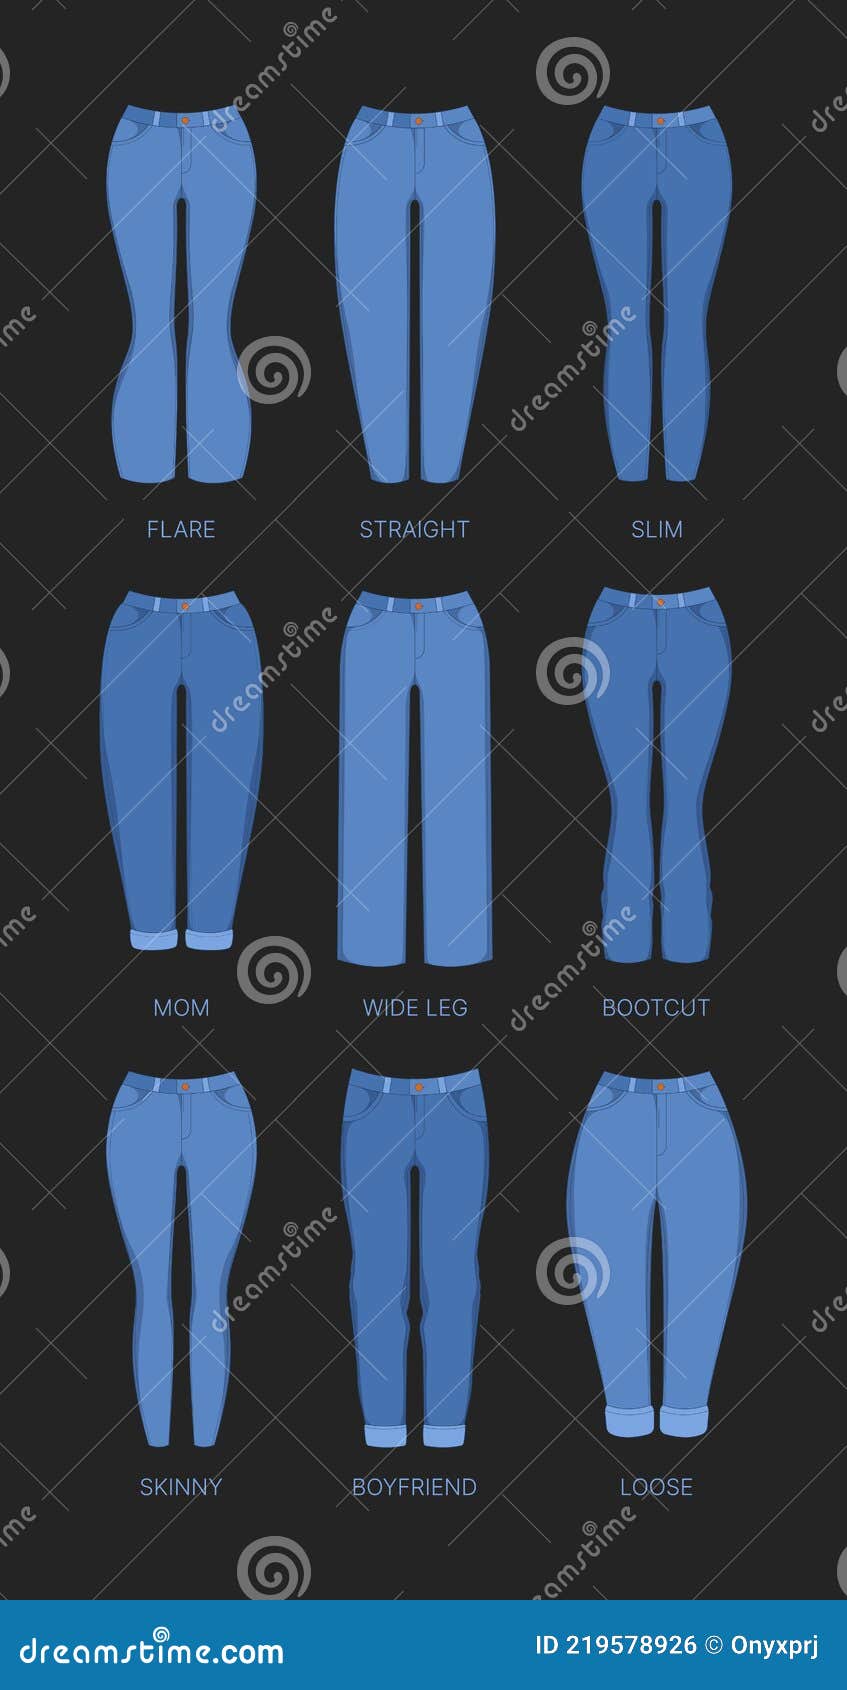 Types of jeans | Types of jeans, Type of pants, Types of fashion styles